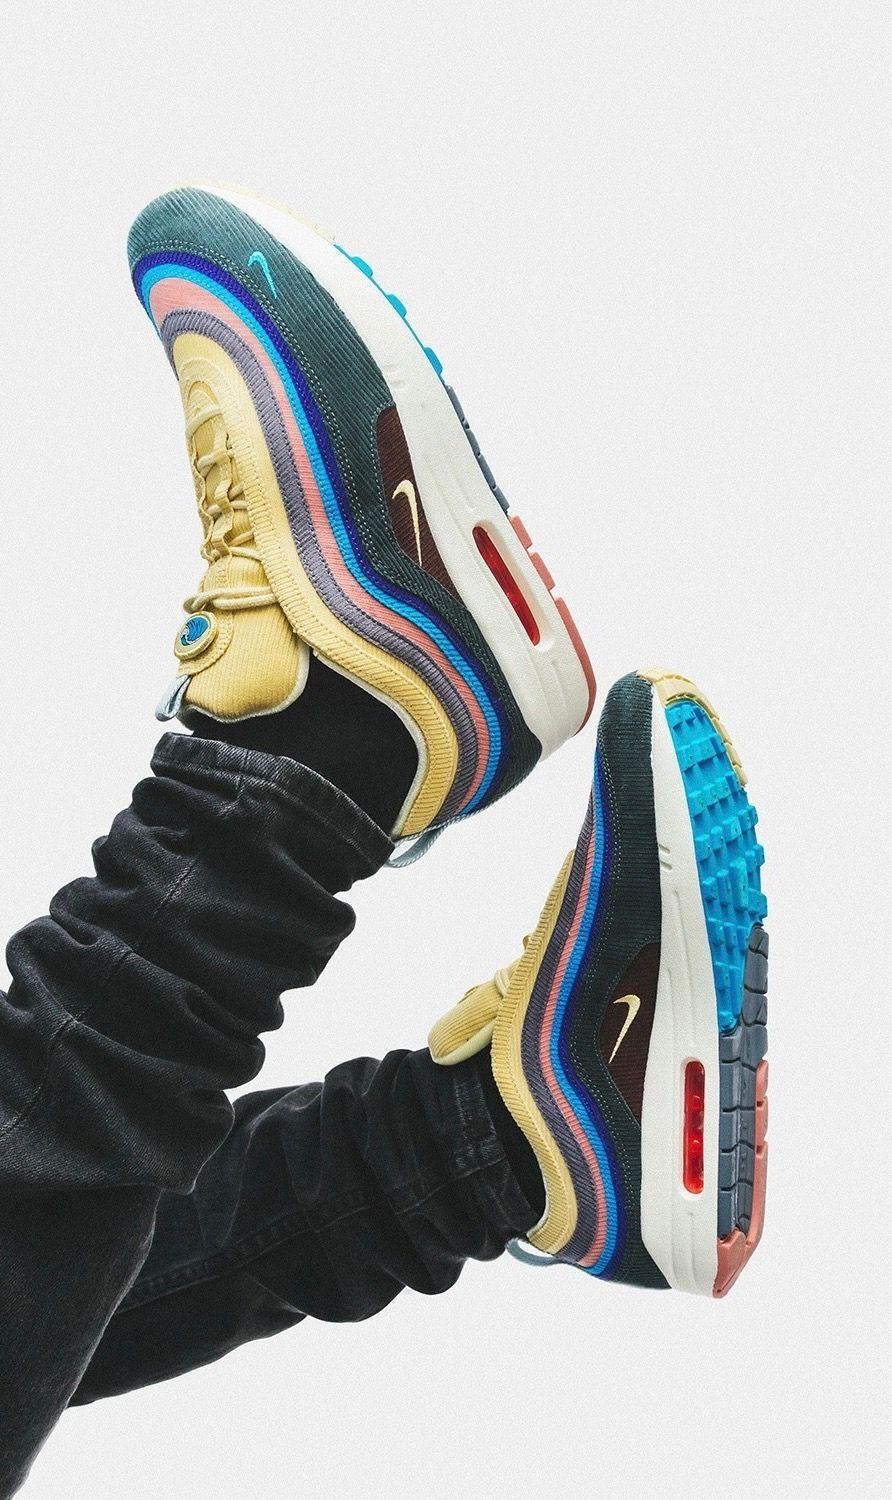 Sean Wotherspoon X Nike Air Max 97 1 In 2019. Hype Shoes